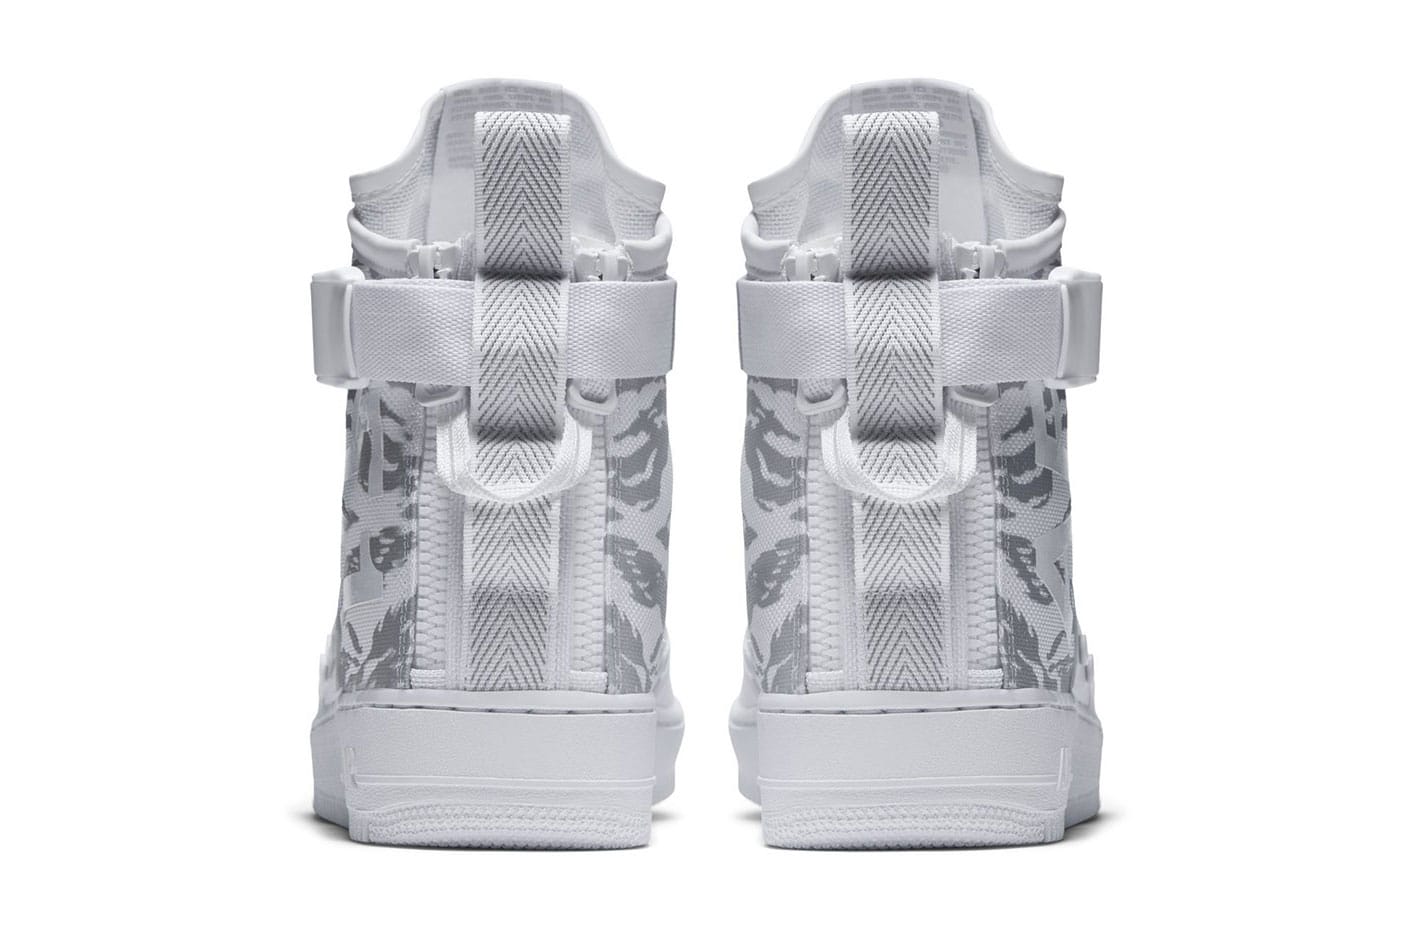 nike air force 1 mid winter camo